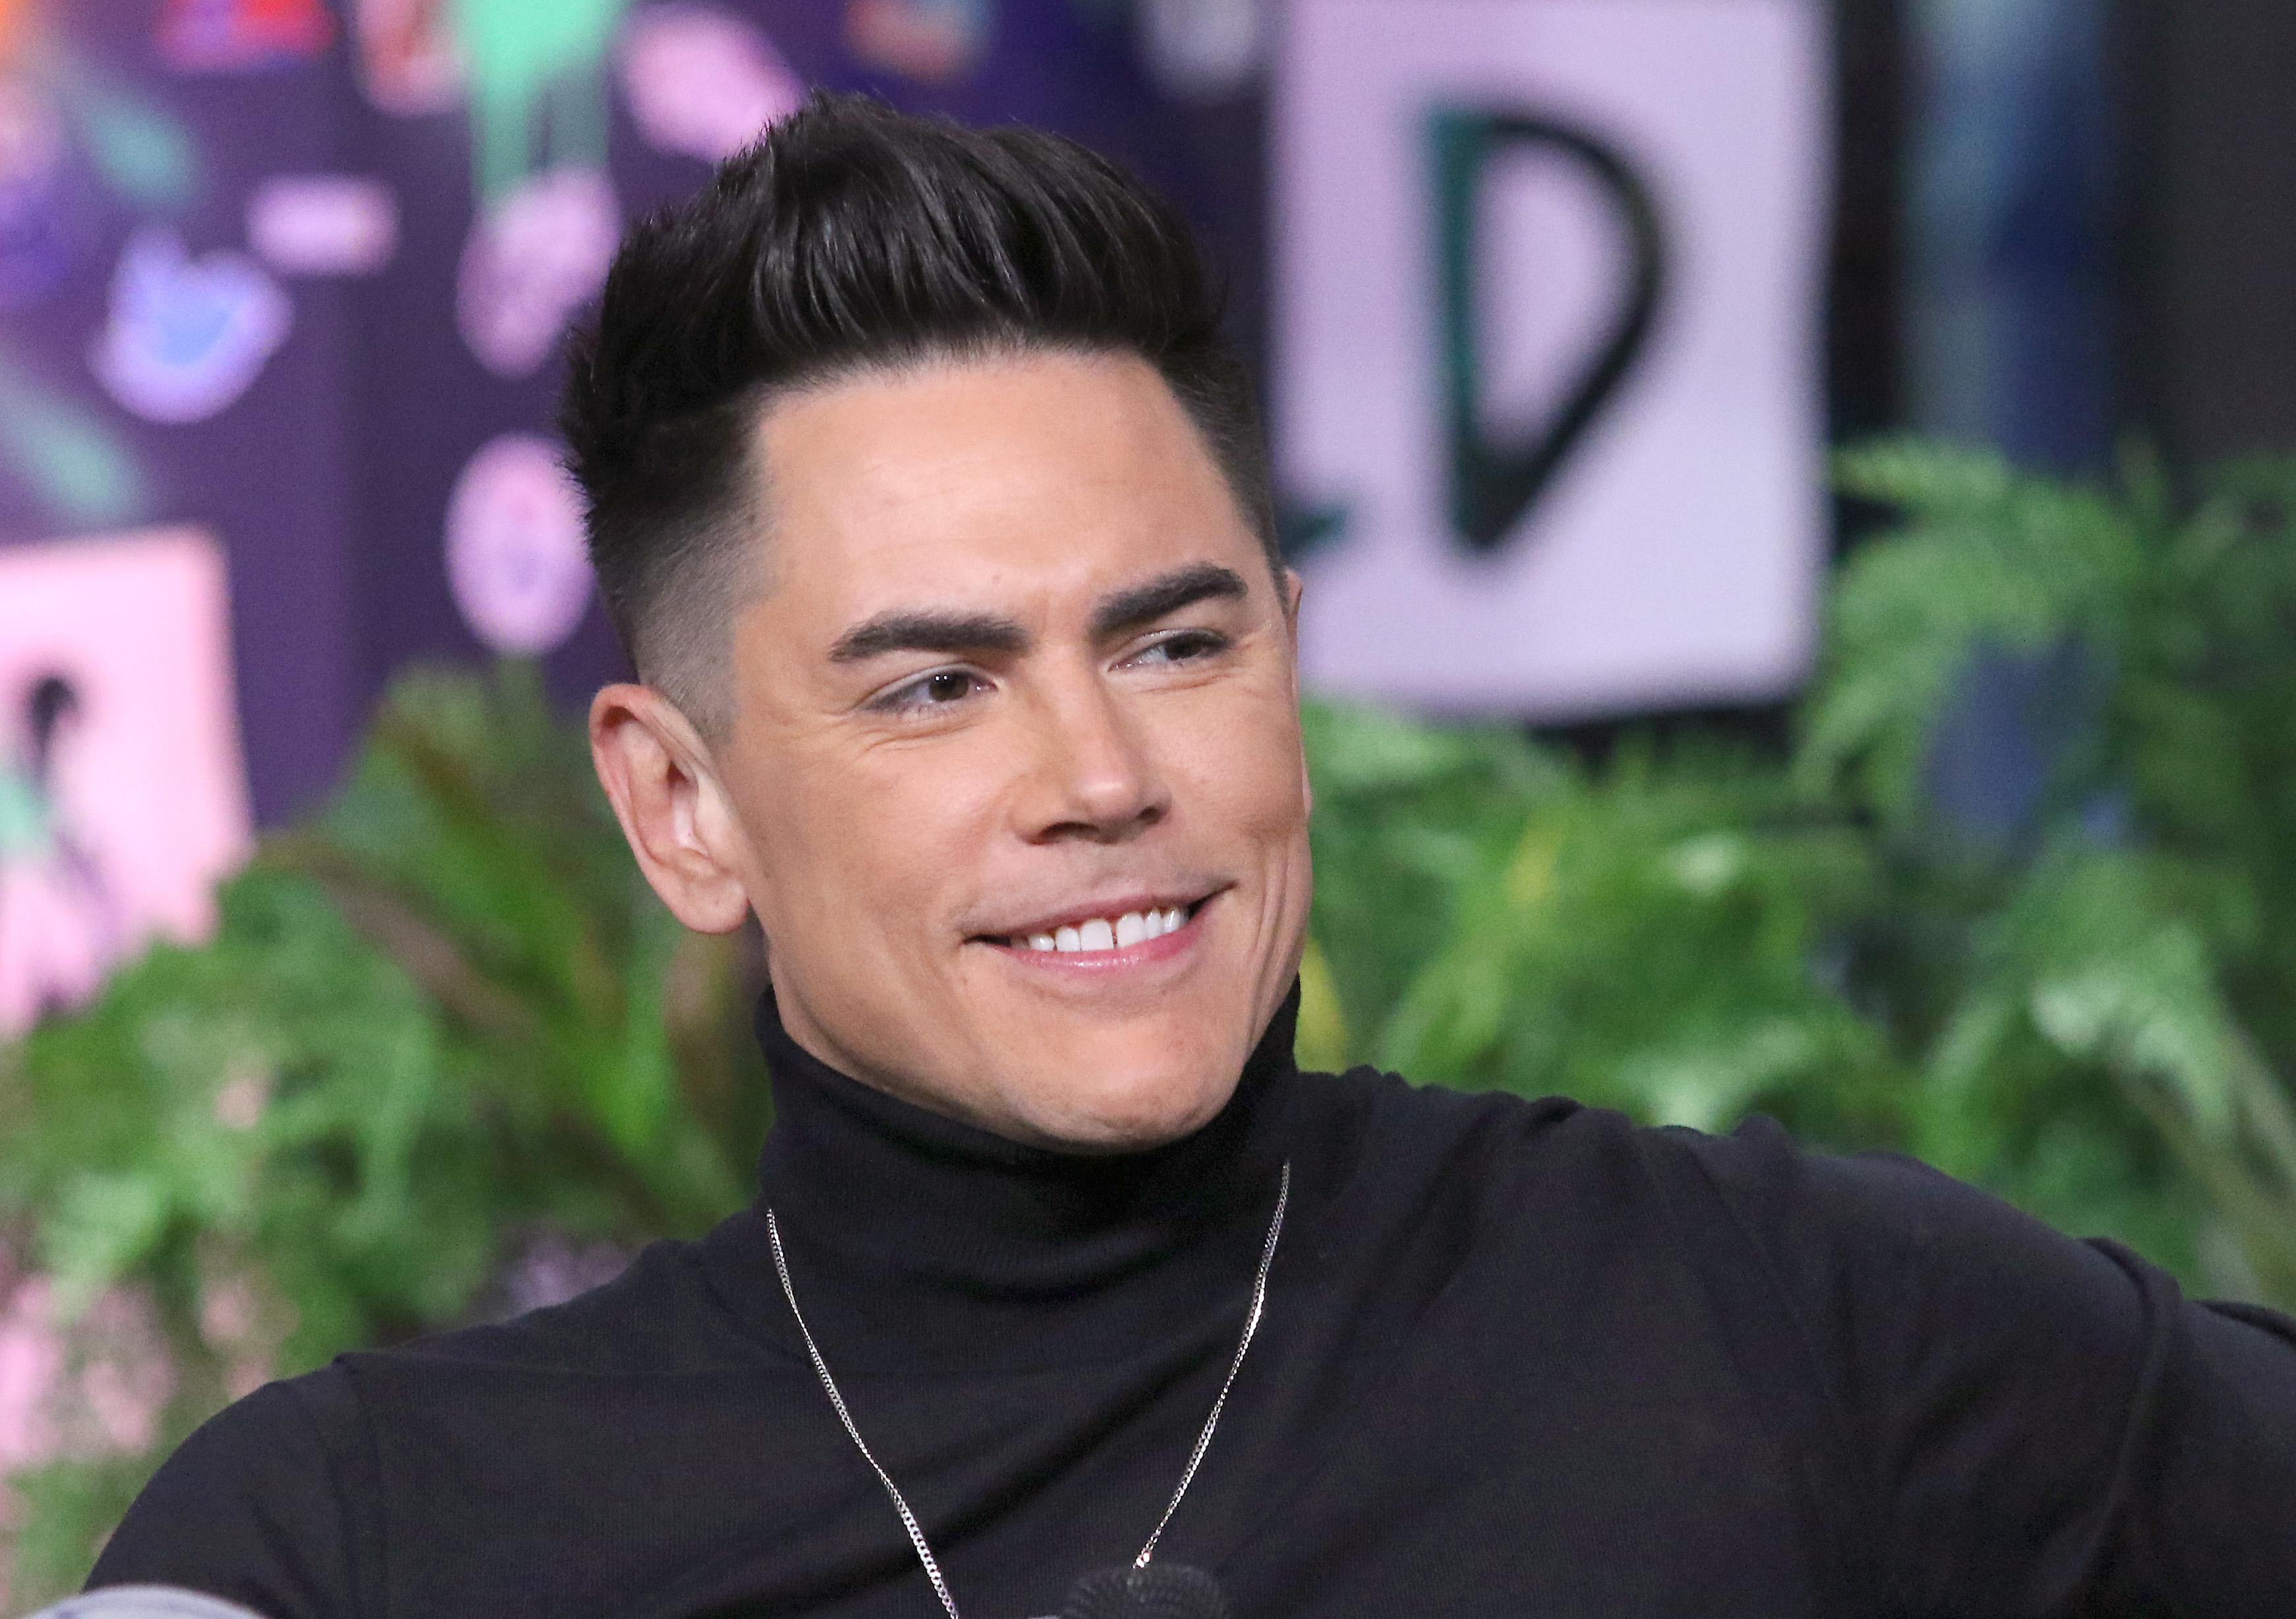 Does Tom Sandoval Think Kristen Doute Is Still Damaged By the End of Their Relationship?